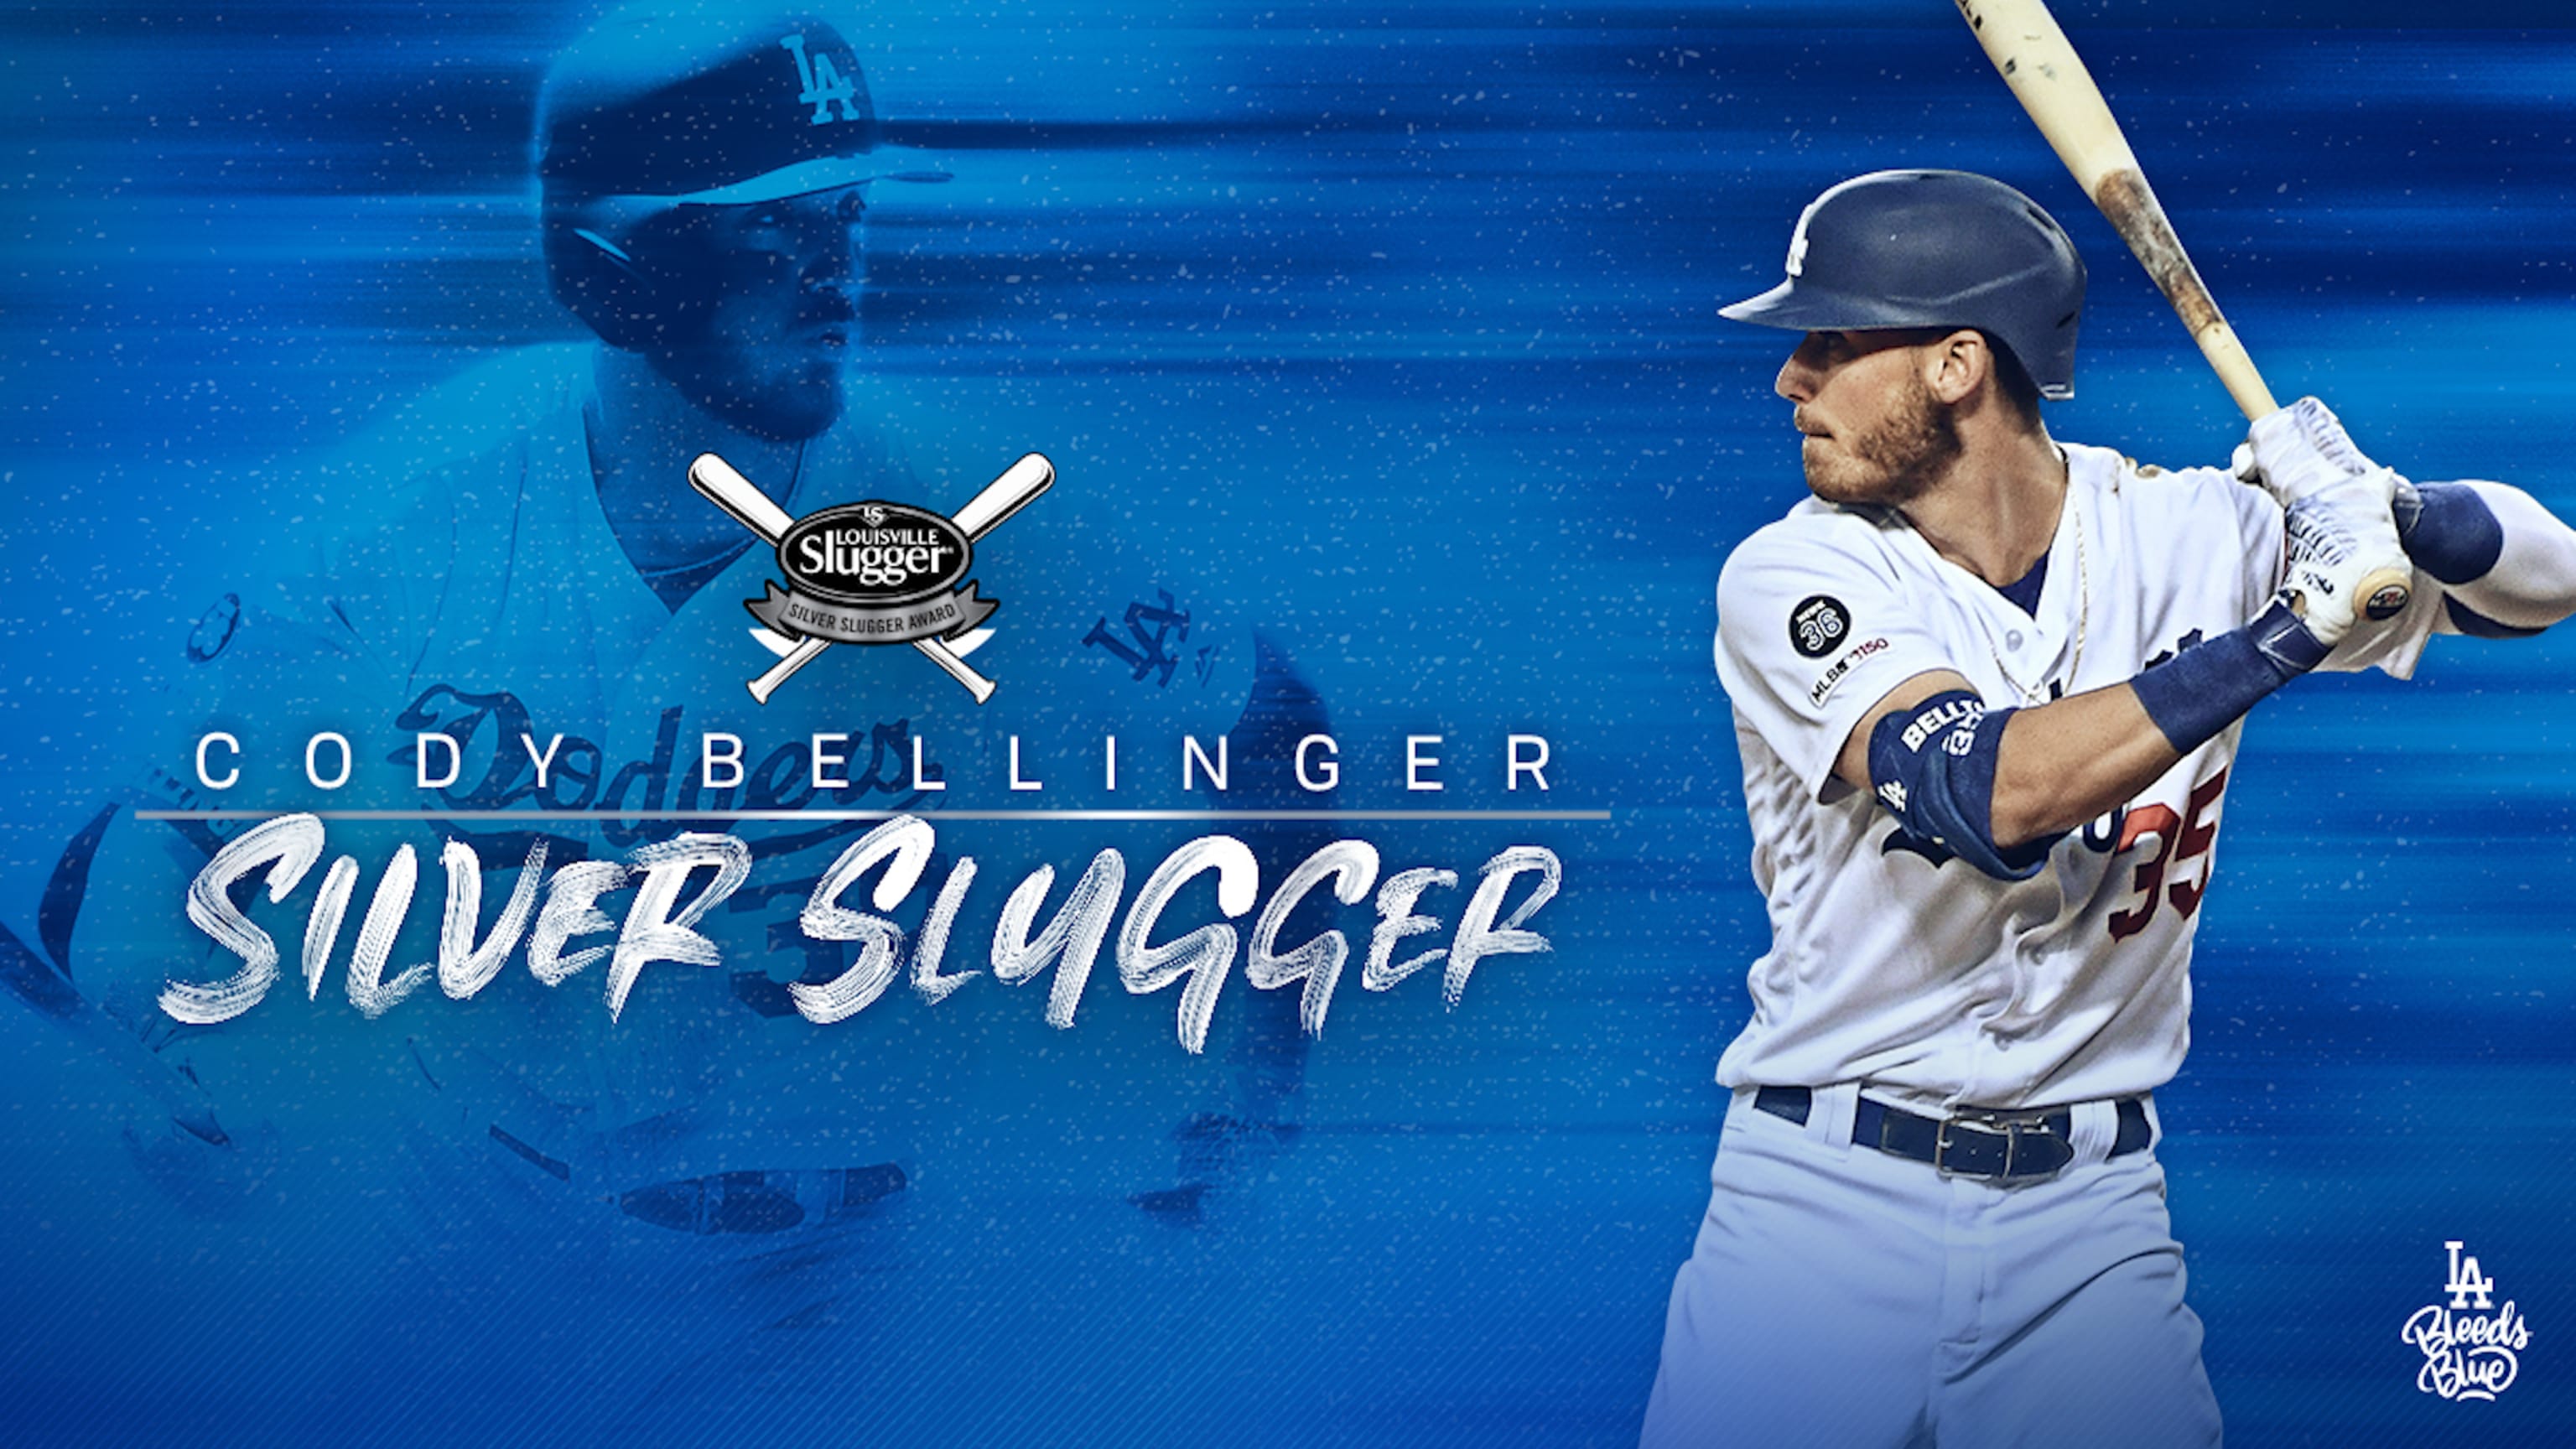 A roundup of Cody Bellinger's awards for 2019